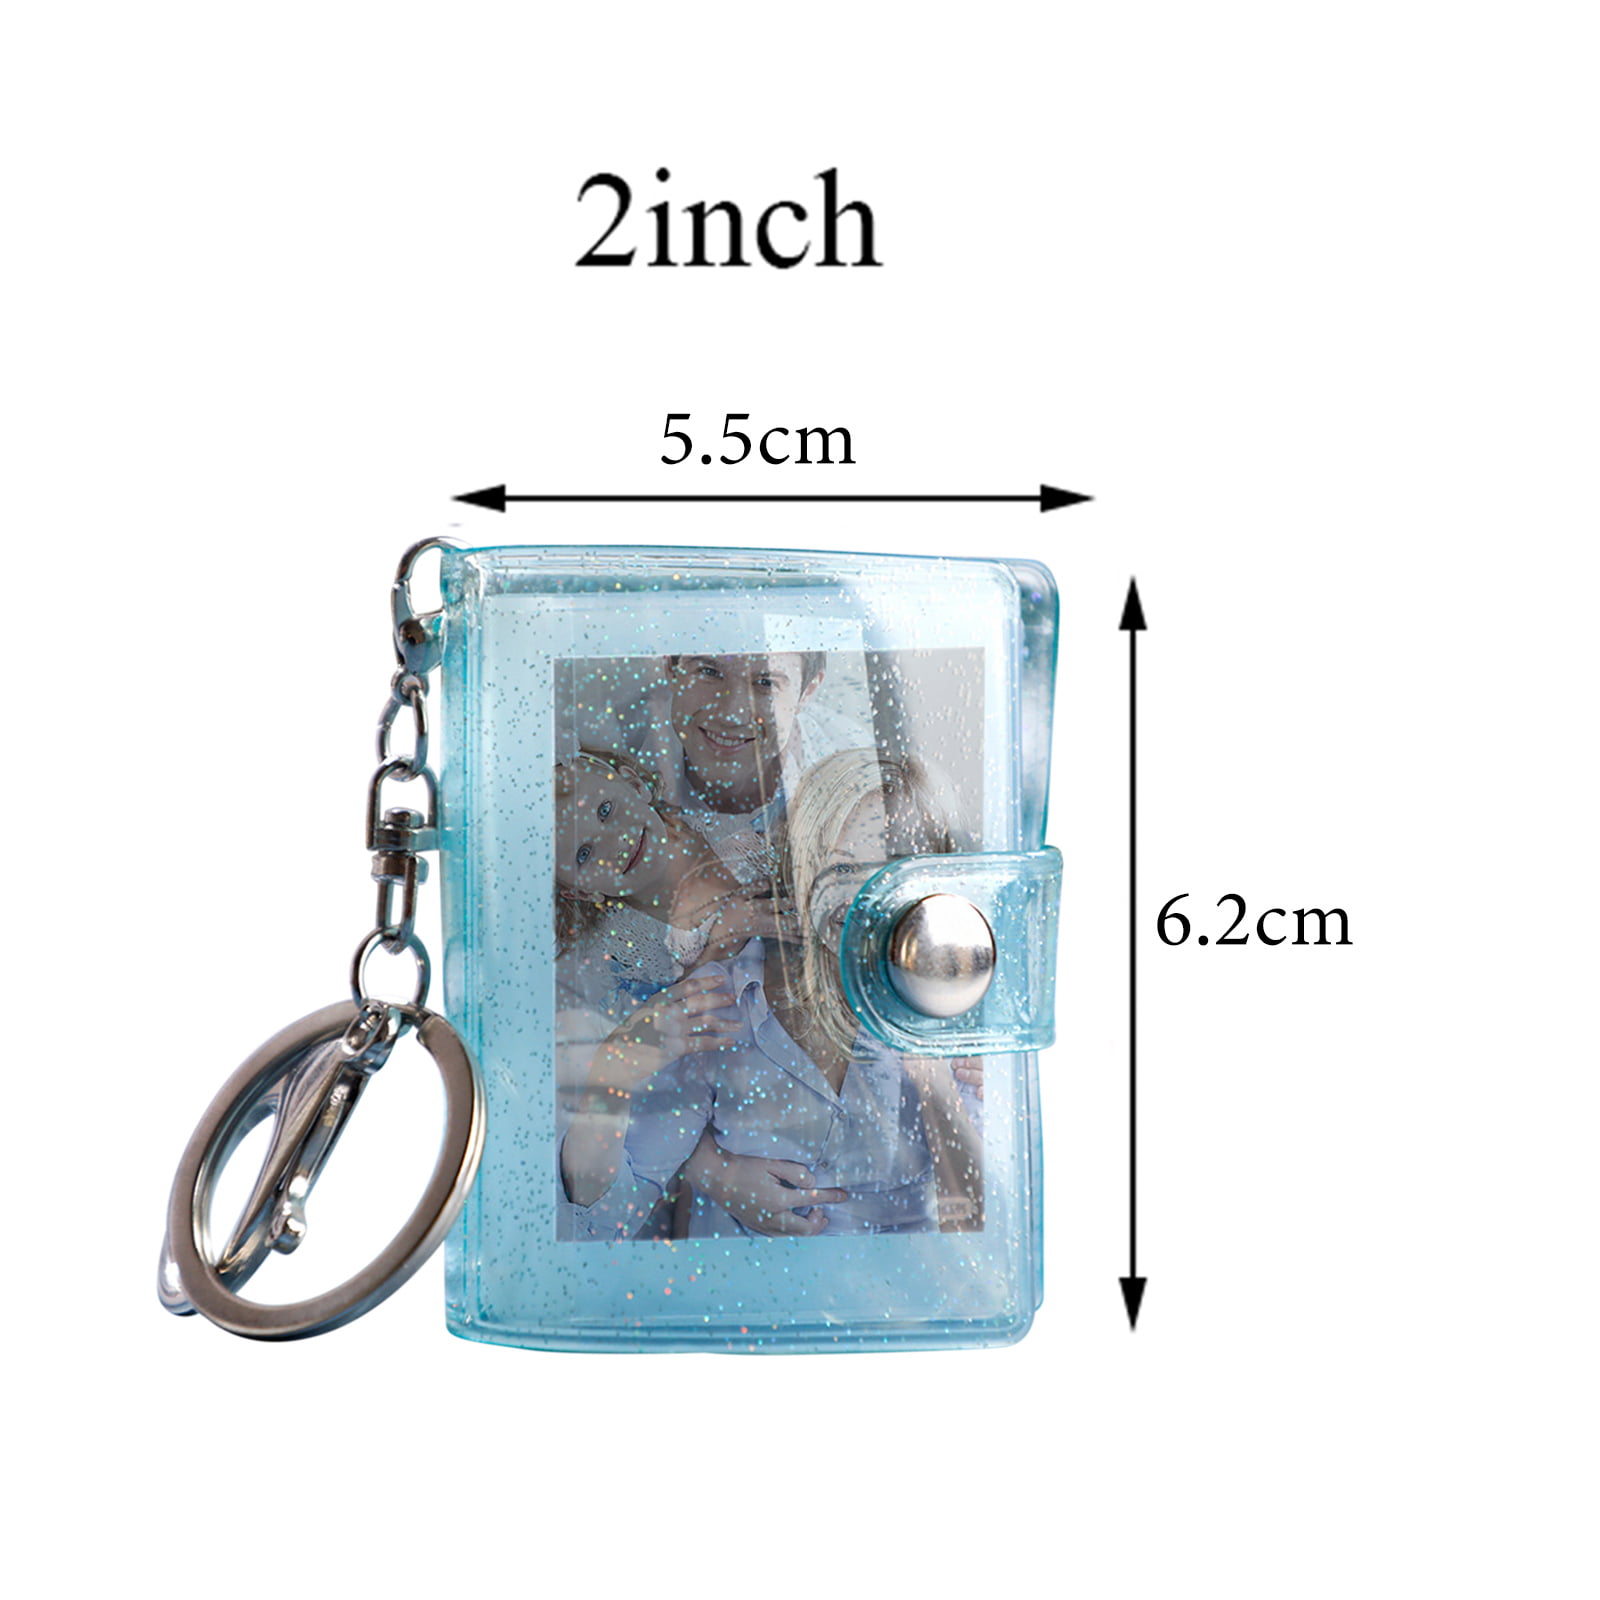 HGYCPP Mini Small Photo Album Keyring 16 Pockets 2 Inch ID Instant Pictures  Interstitial Storage Card Book Keychain Lover Time Memory Gift 